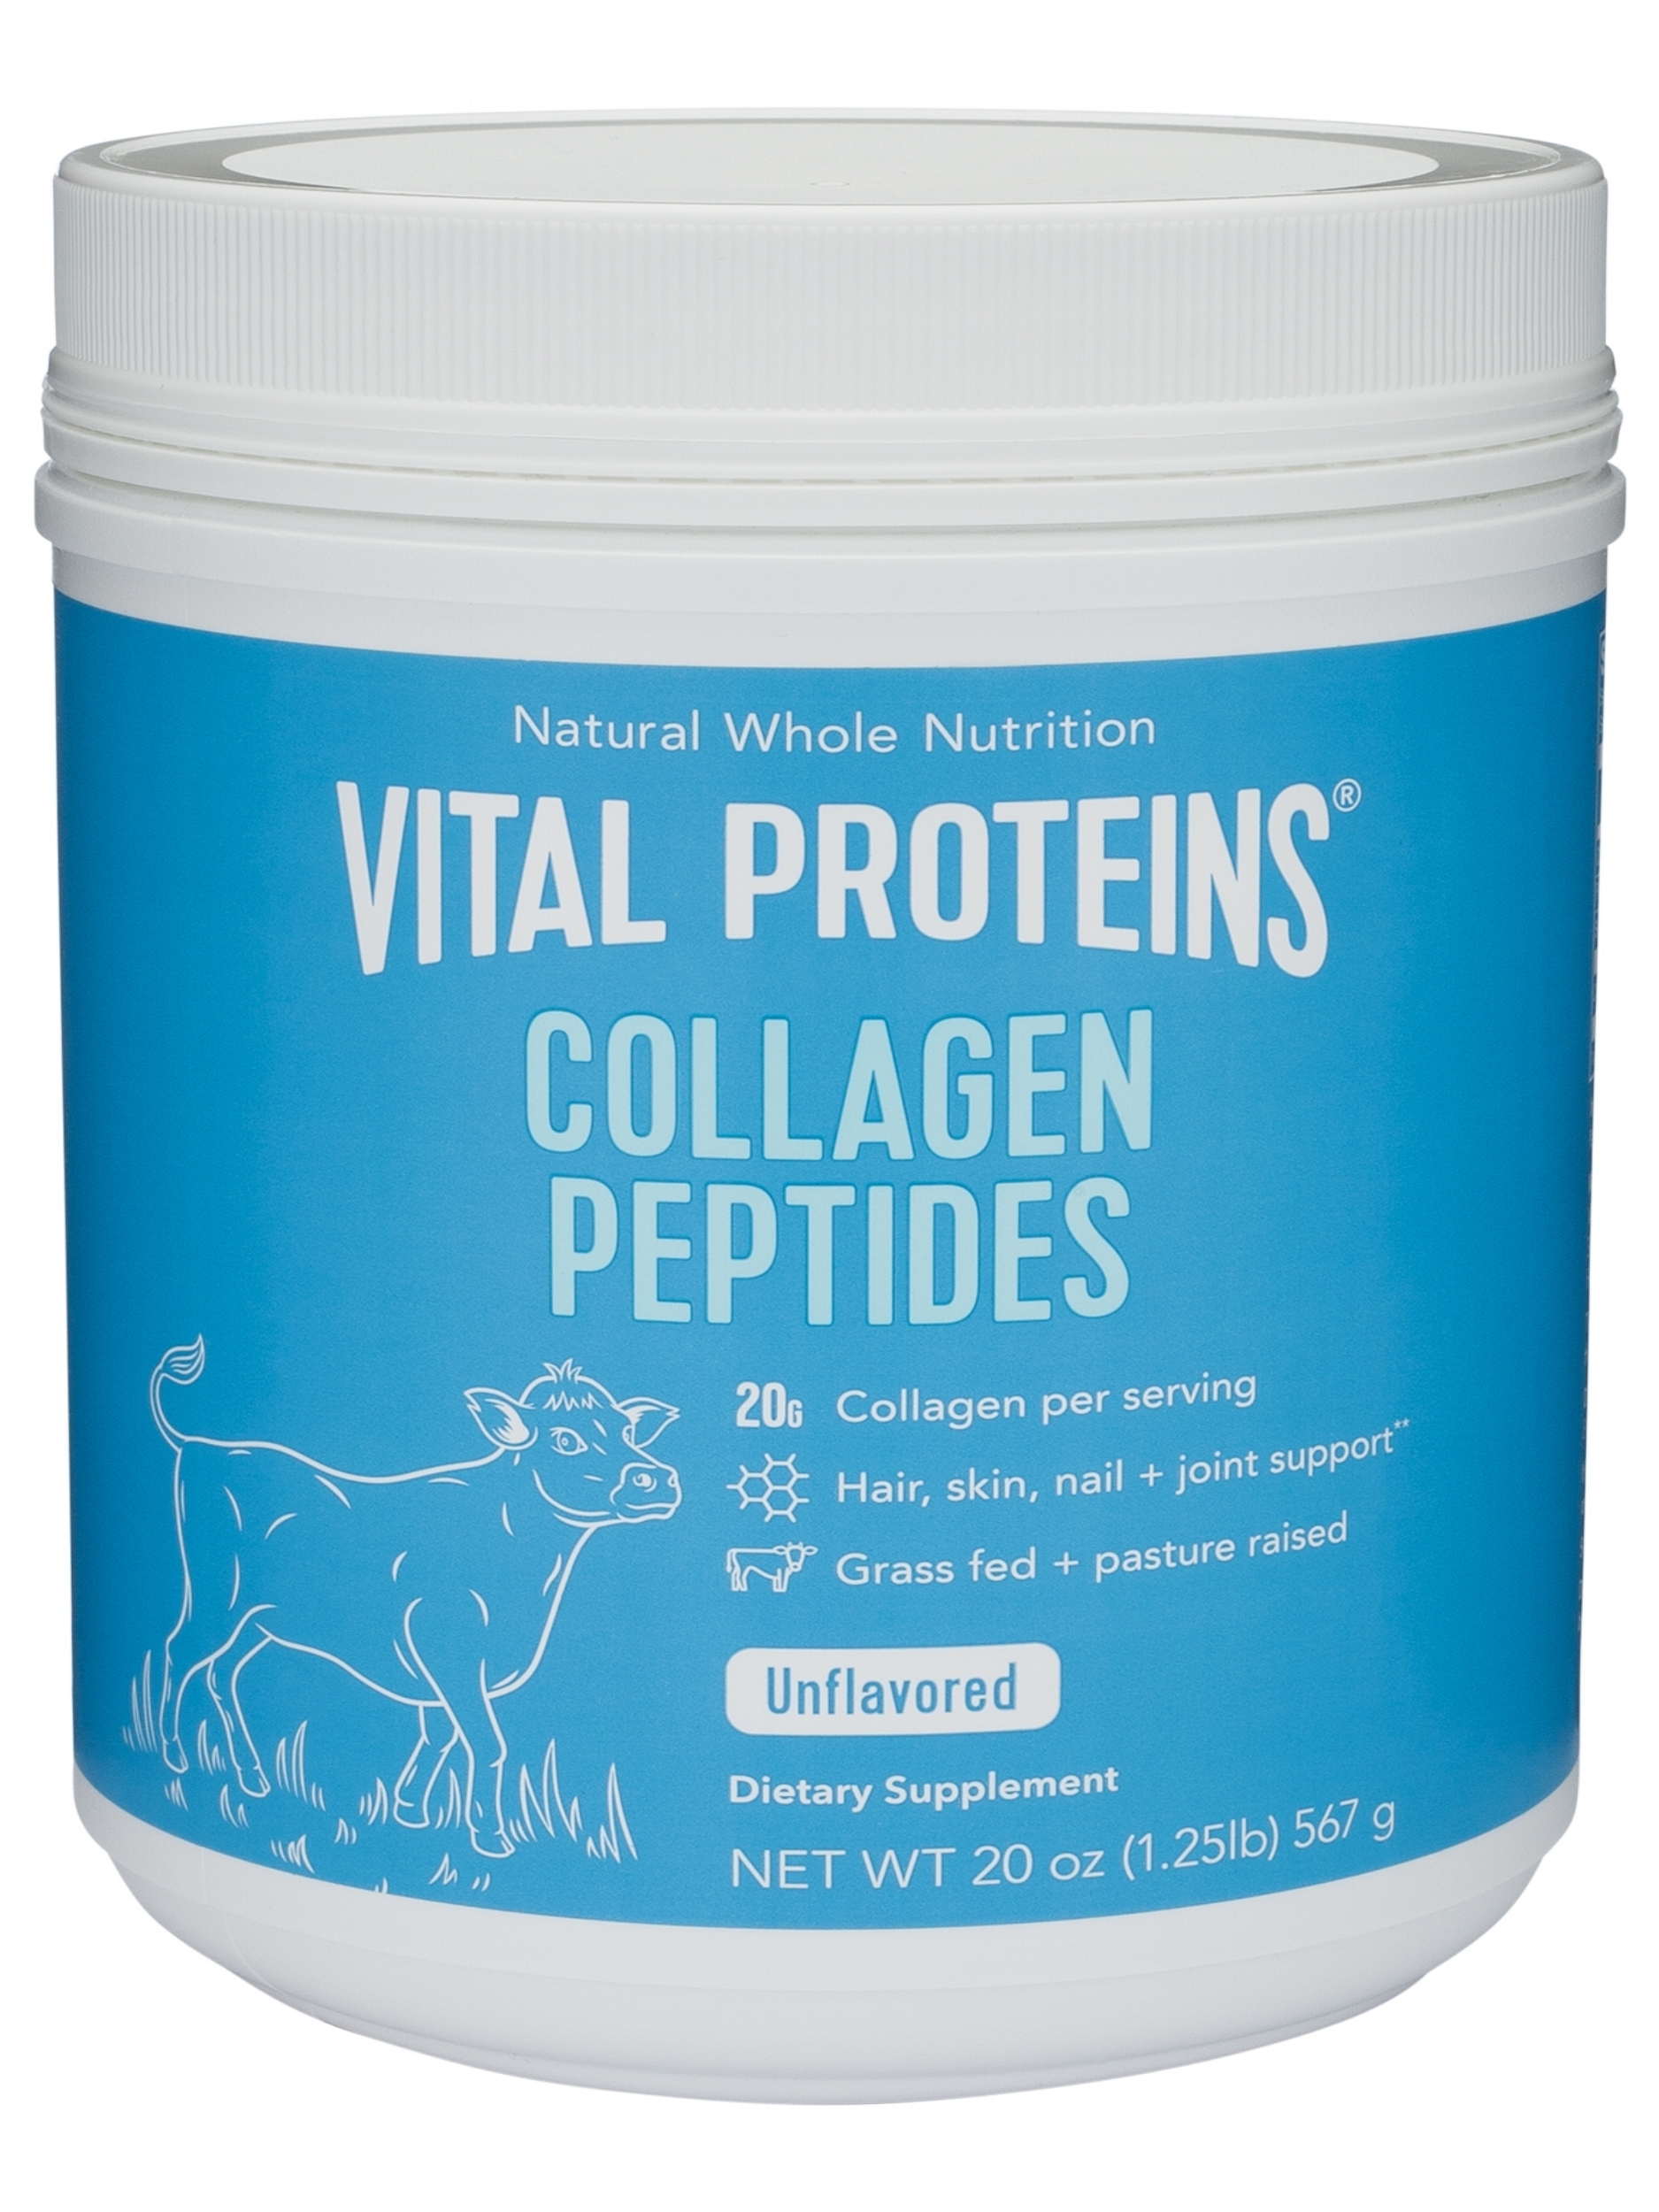 A tub of Vital Proteins' Collagen Peptides